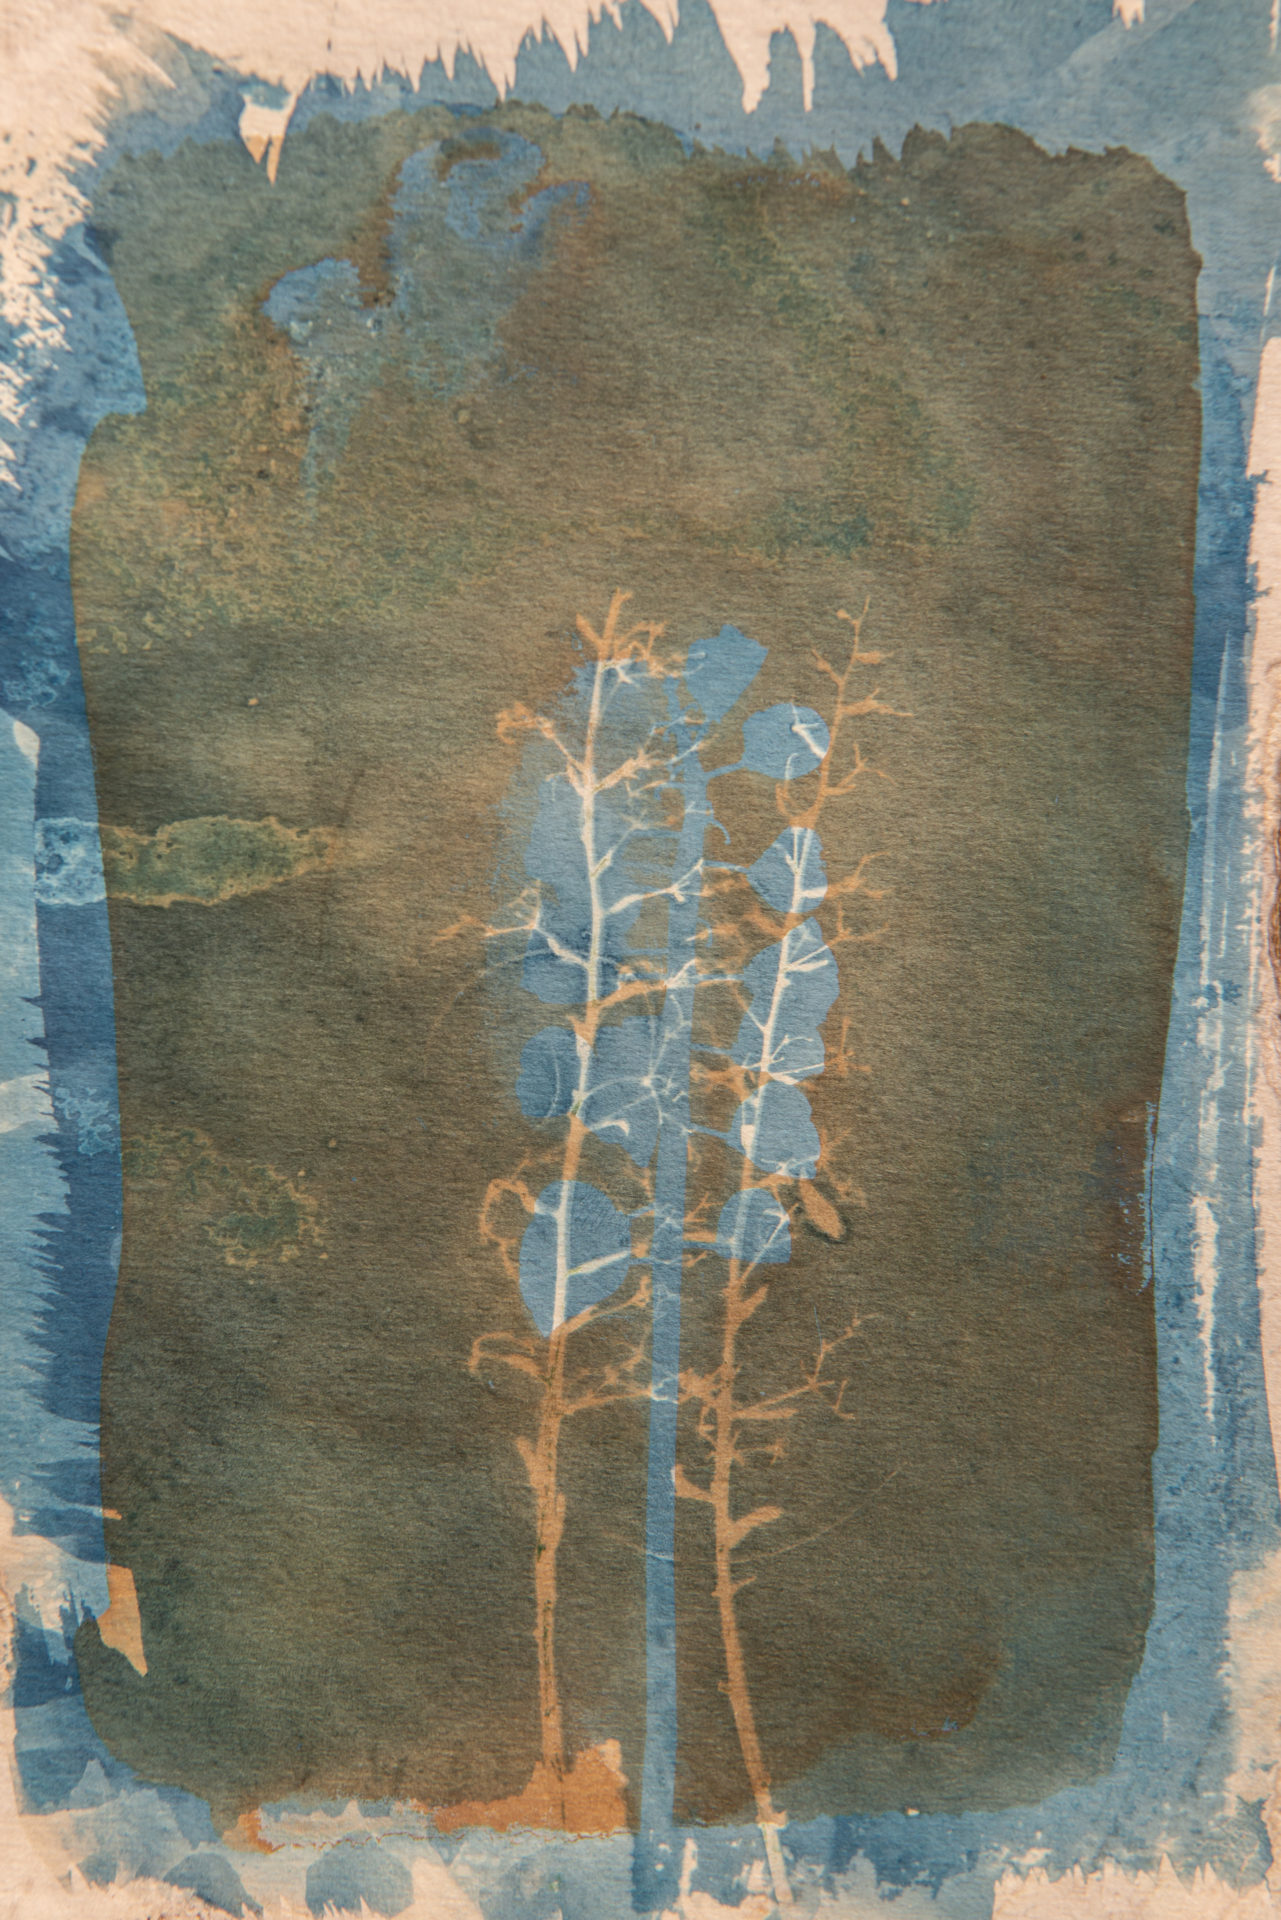 cyanotype contemporary art blue and brown botanical art for sale London